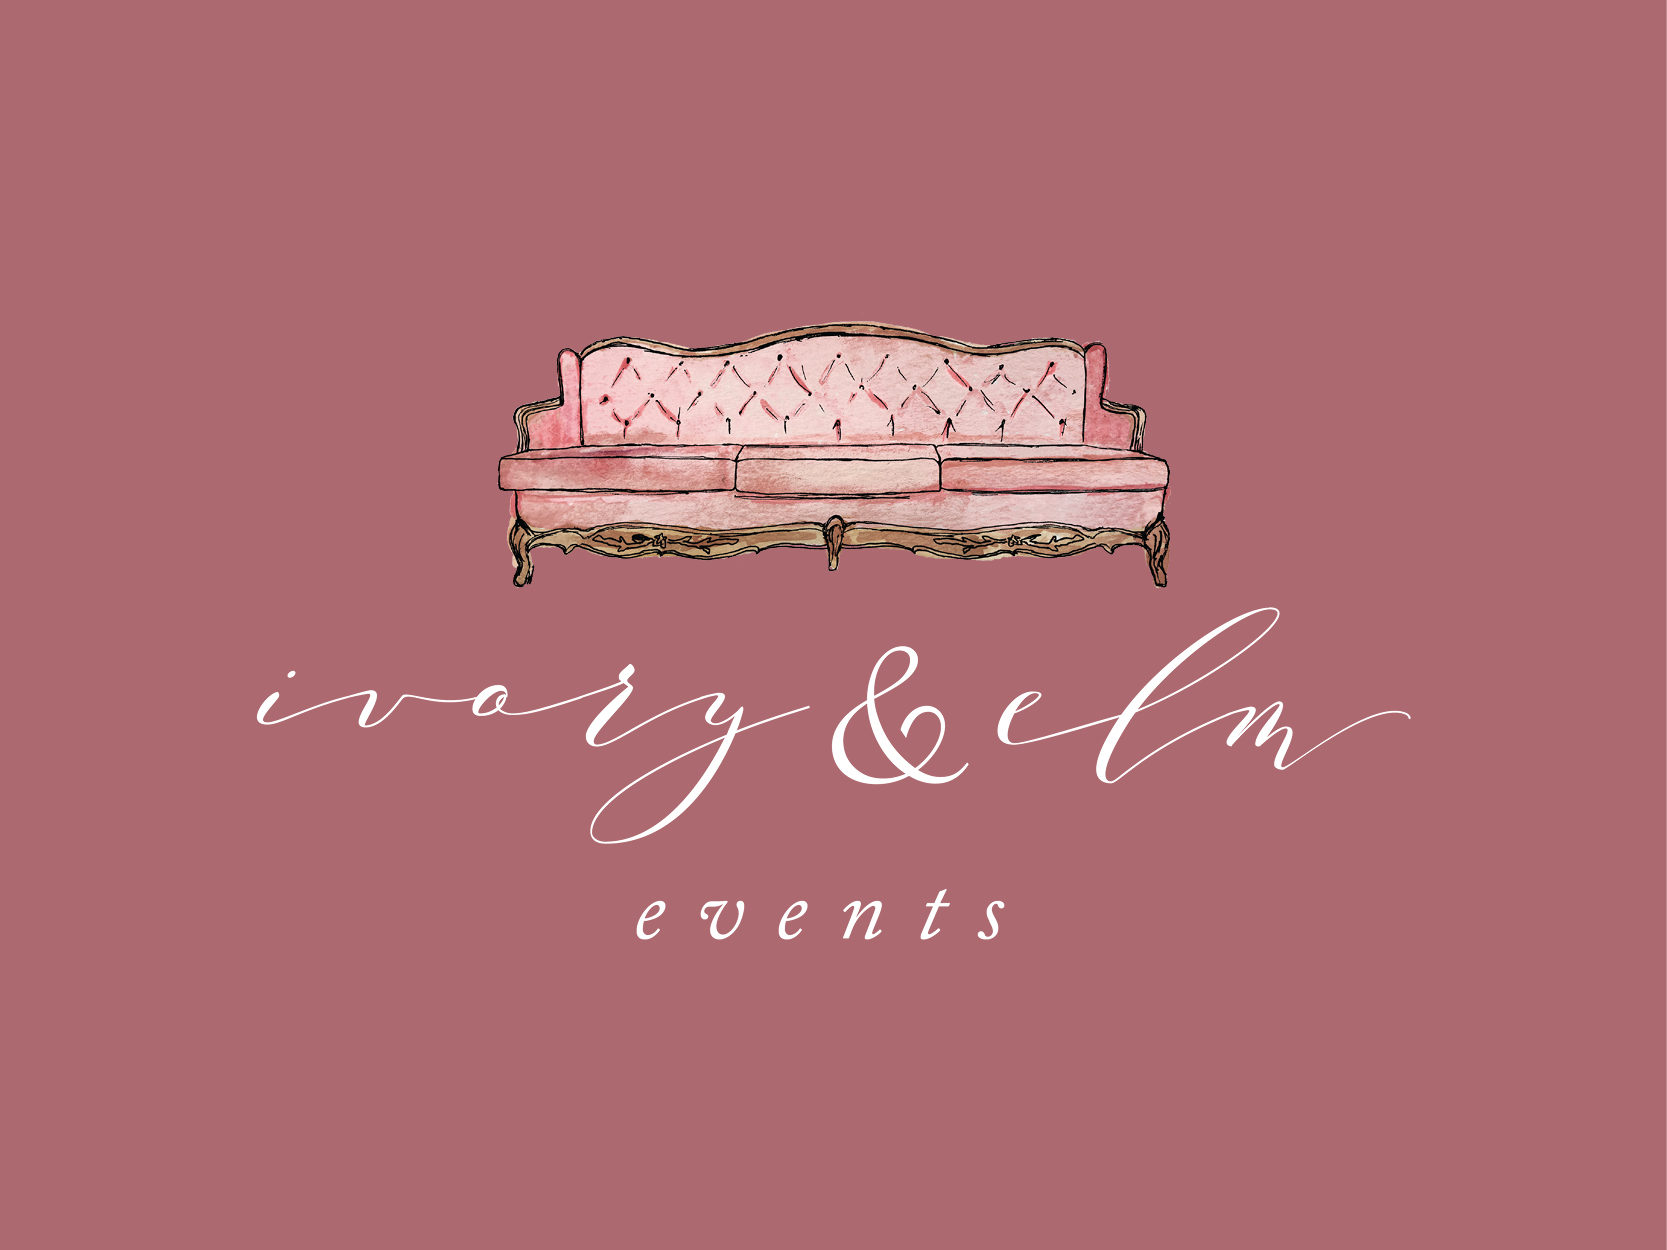 Ivory and Elm Events is a wedding planning and rental company with a custom Squarespace website design by Emma Rose Company. #mauvebranding #weddingplanner #ivoryandelm #emmarosecompany